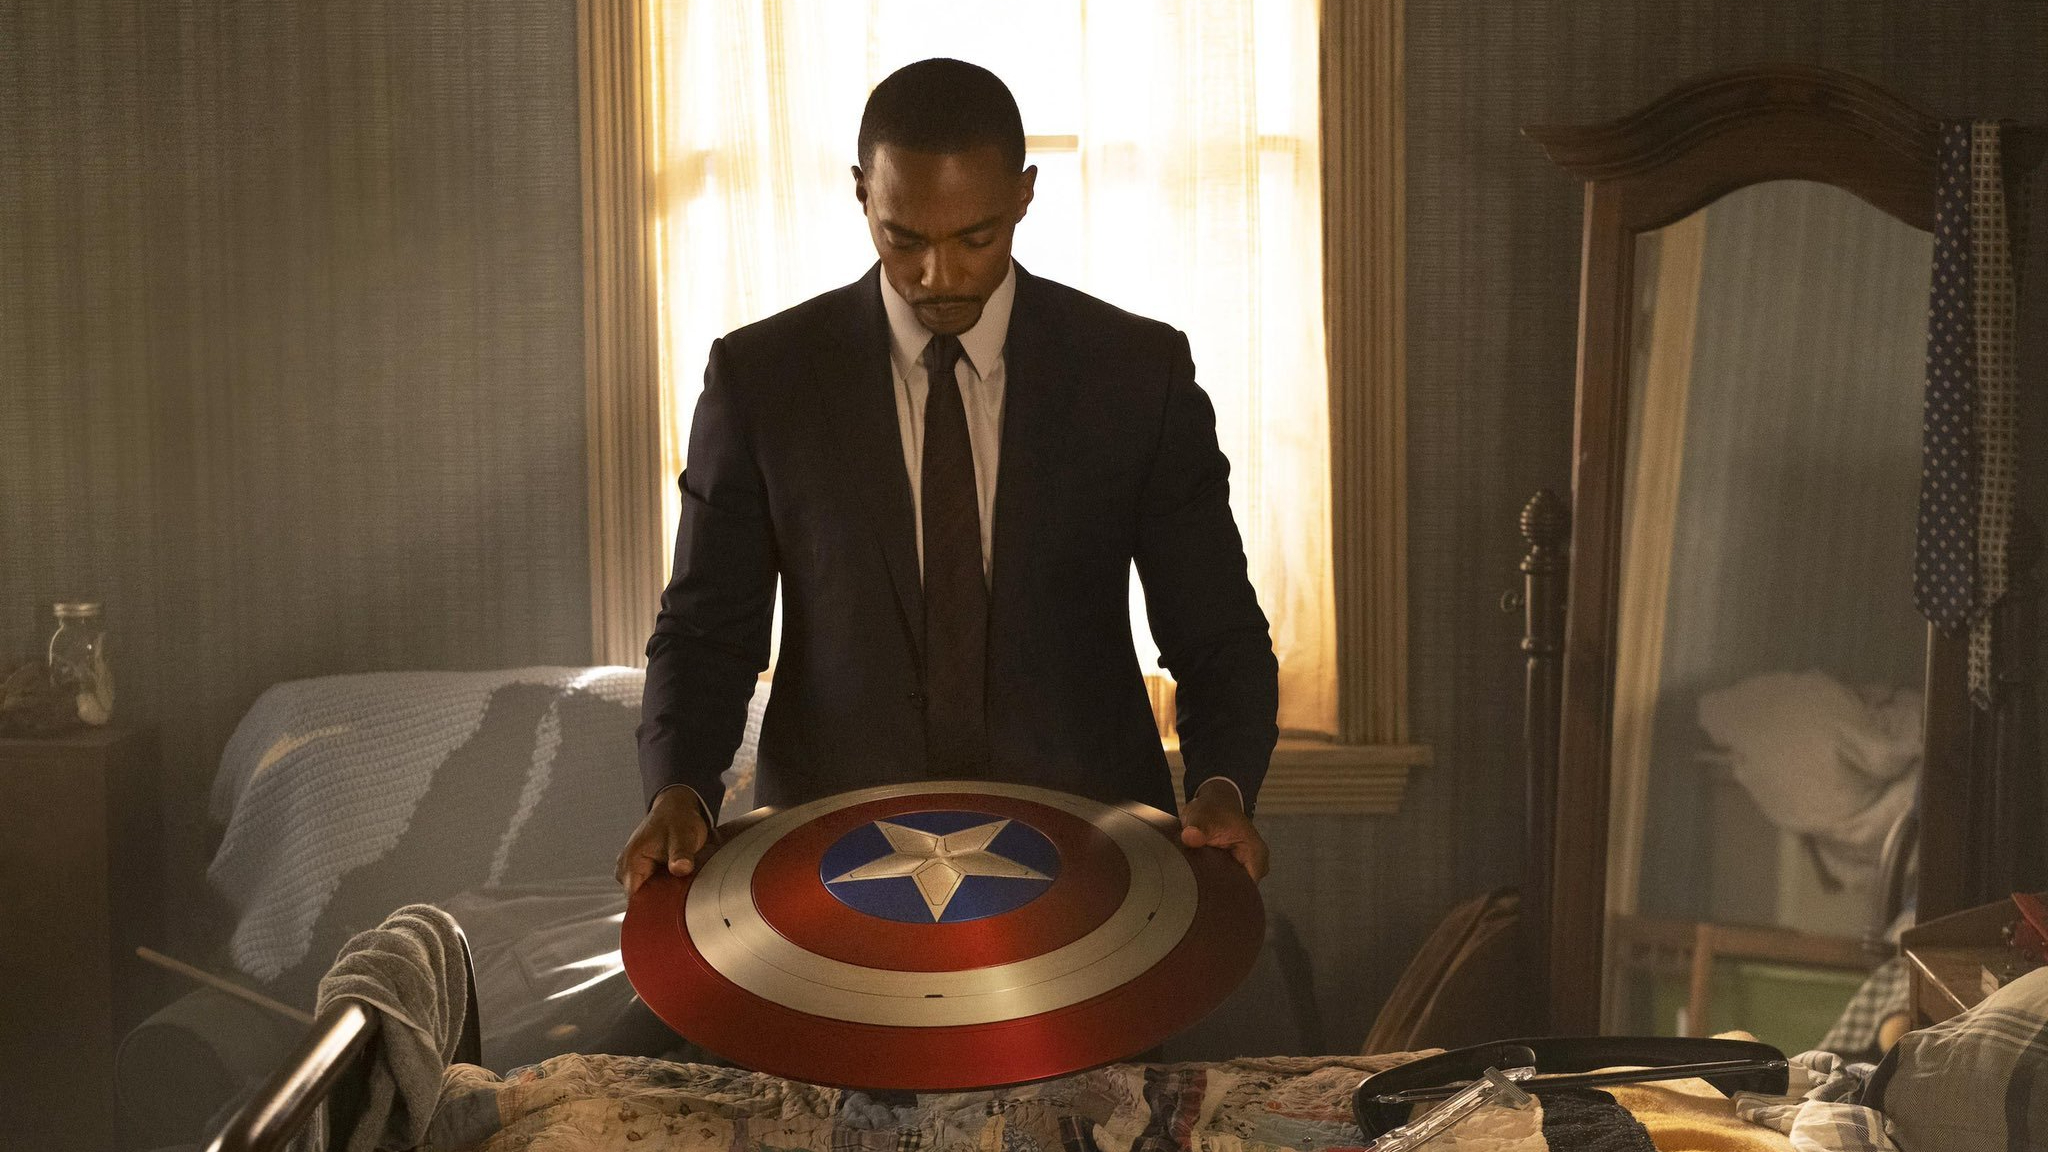 Anthony Mackie as Sam Wilson holding Captain America's shield in a suit and tie as seen in The Falcon and the Winter Soldier.